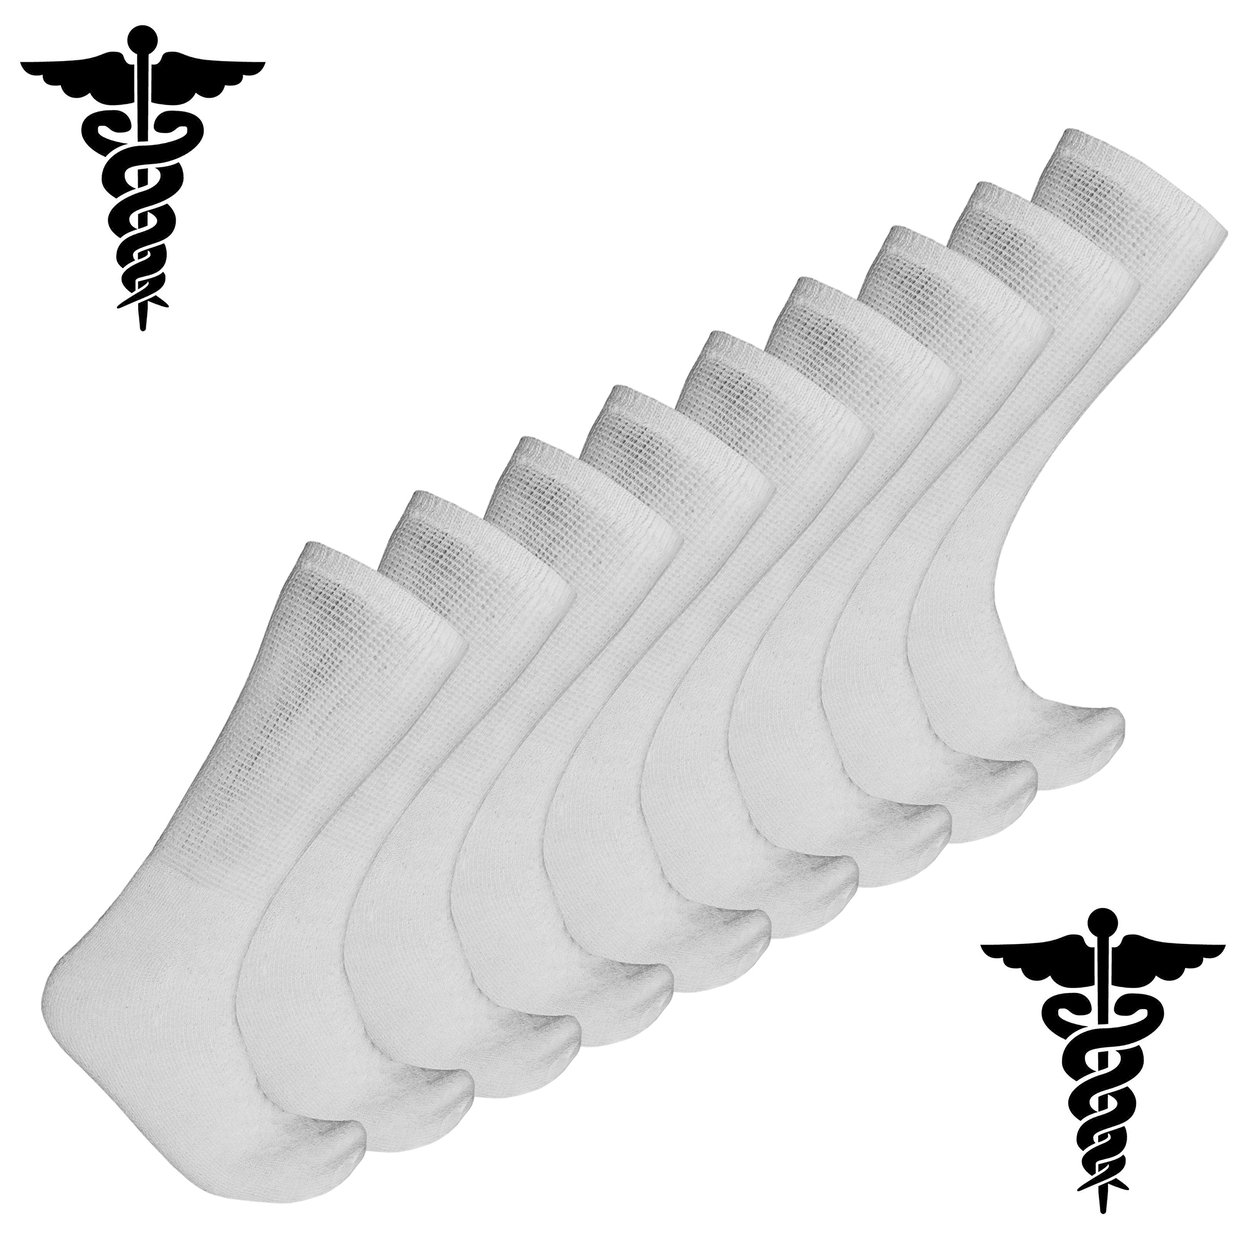 9-Pairs: Physician Approved Non-Binding Neuropathy Diabetic Crew Circulatory Socks - Assorted